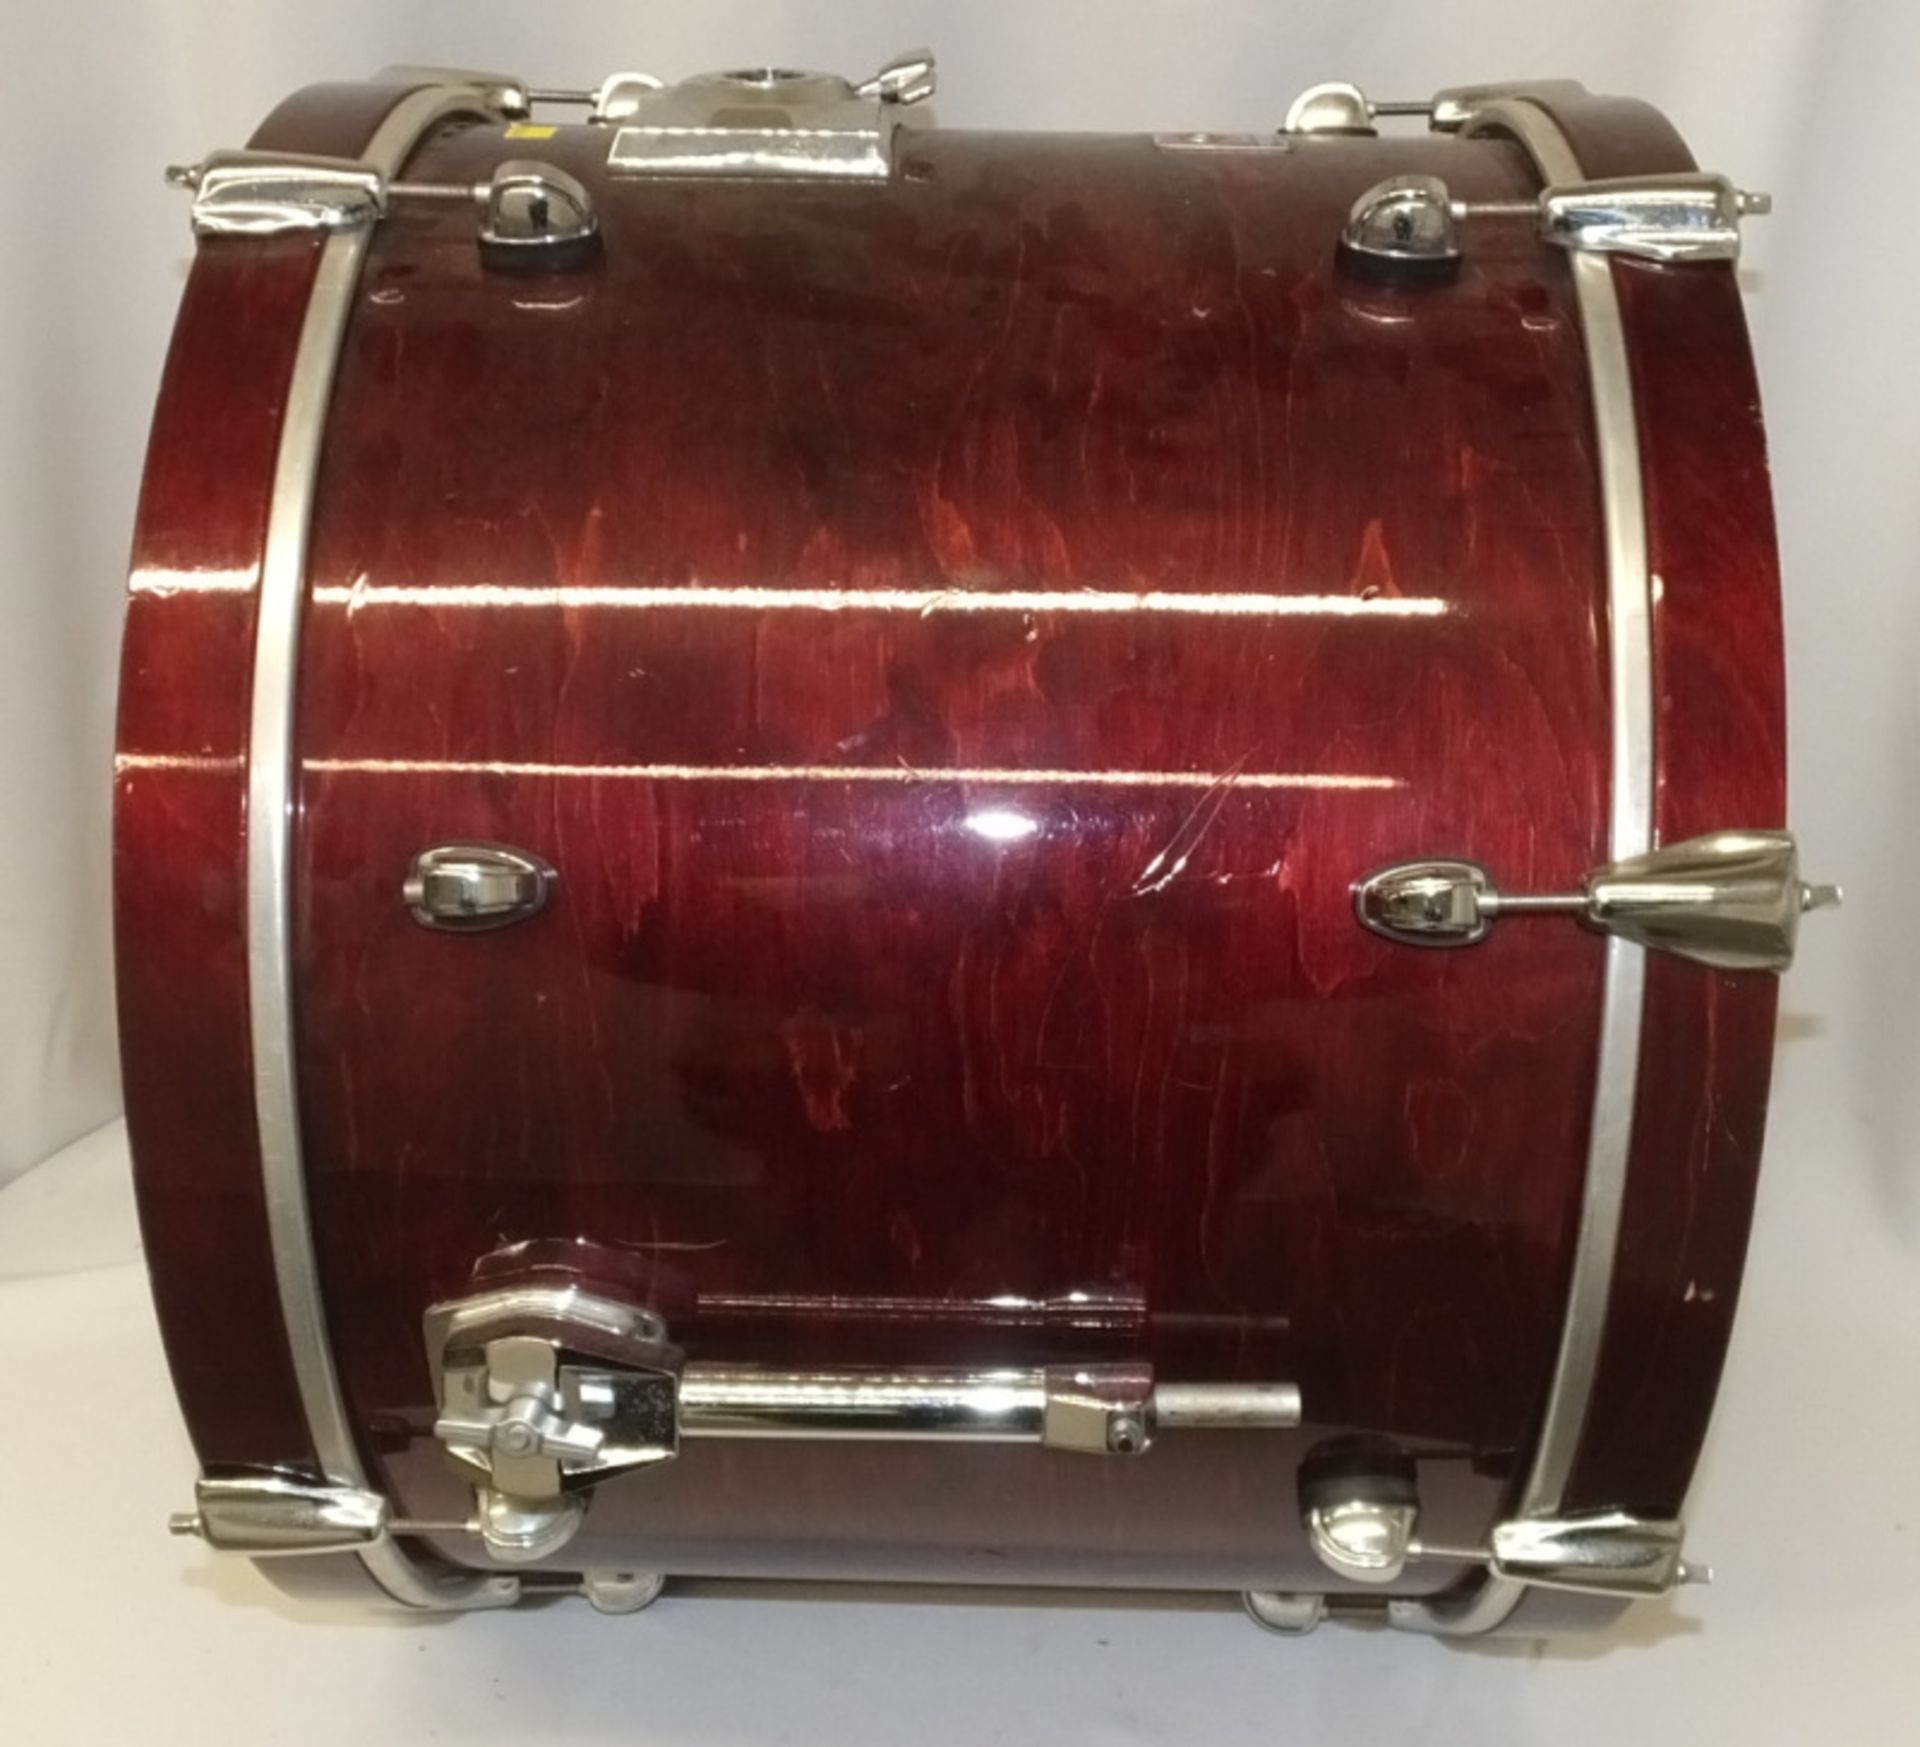 Premier Drum Kit Bass Drum - 22 x 18.5 inch (missing foot on leg) - Please check photos carefully - Image 9 of 10